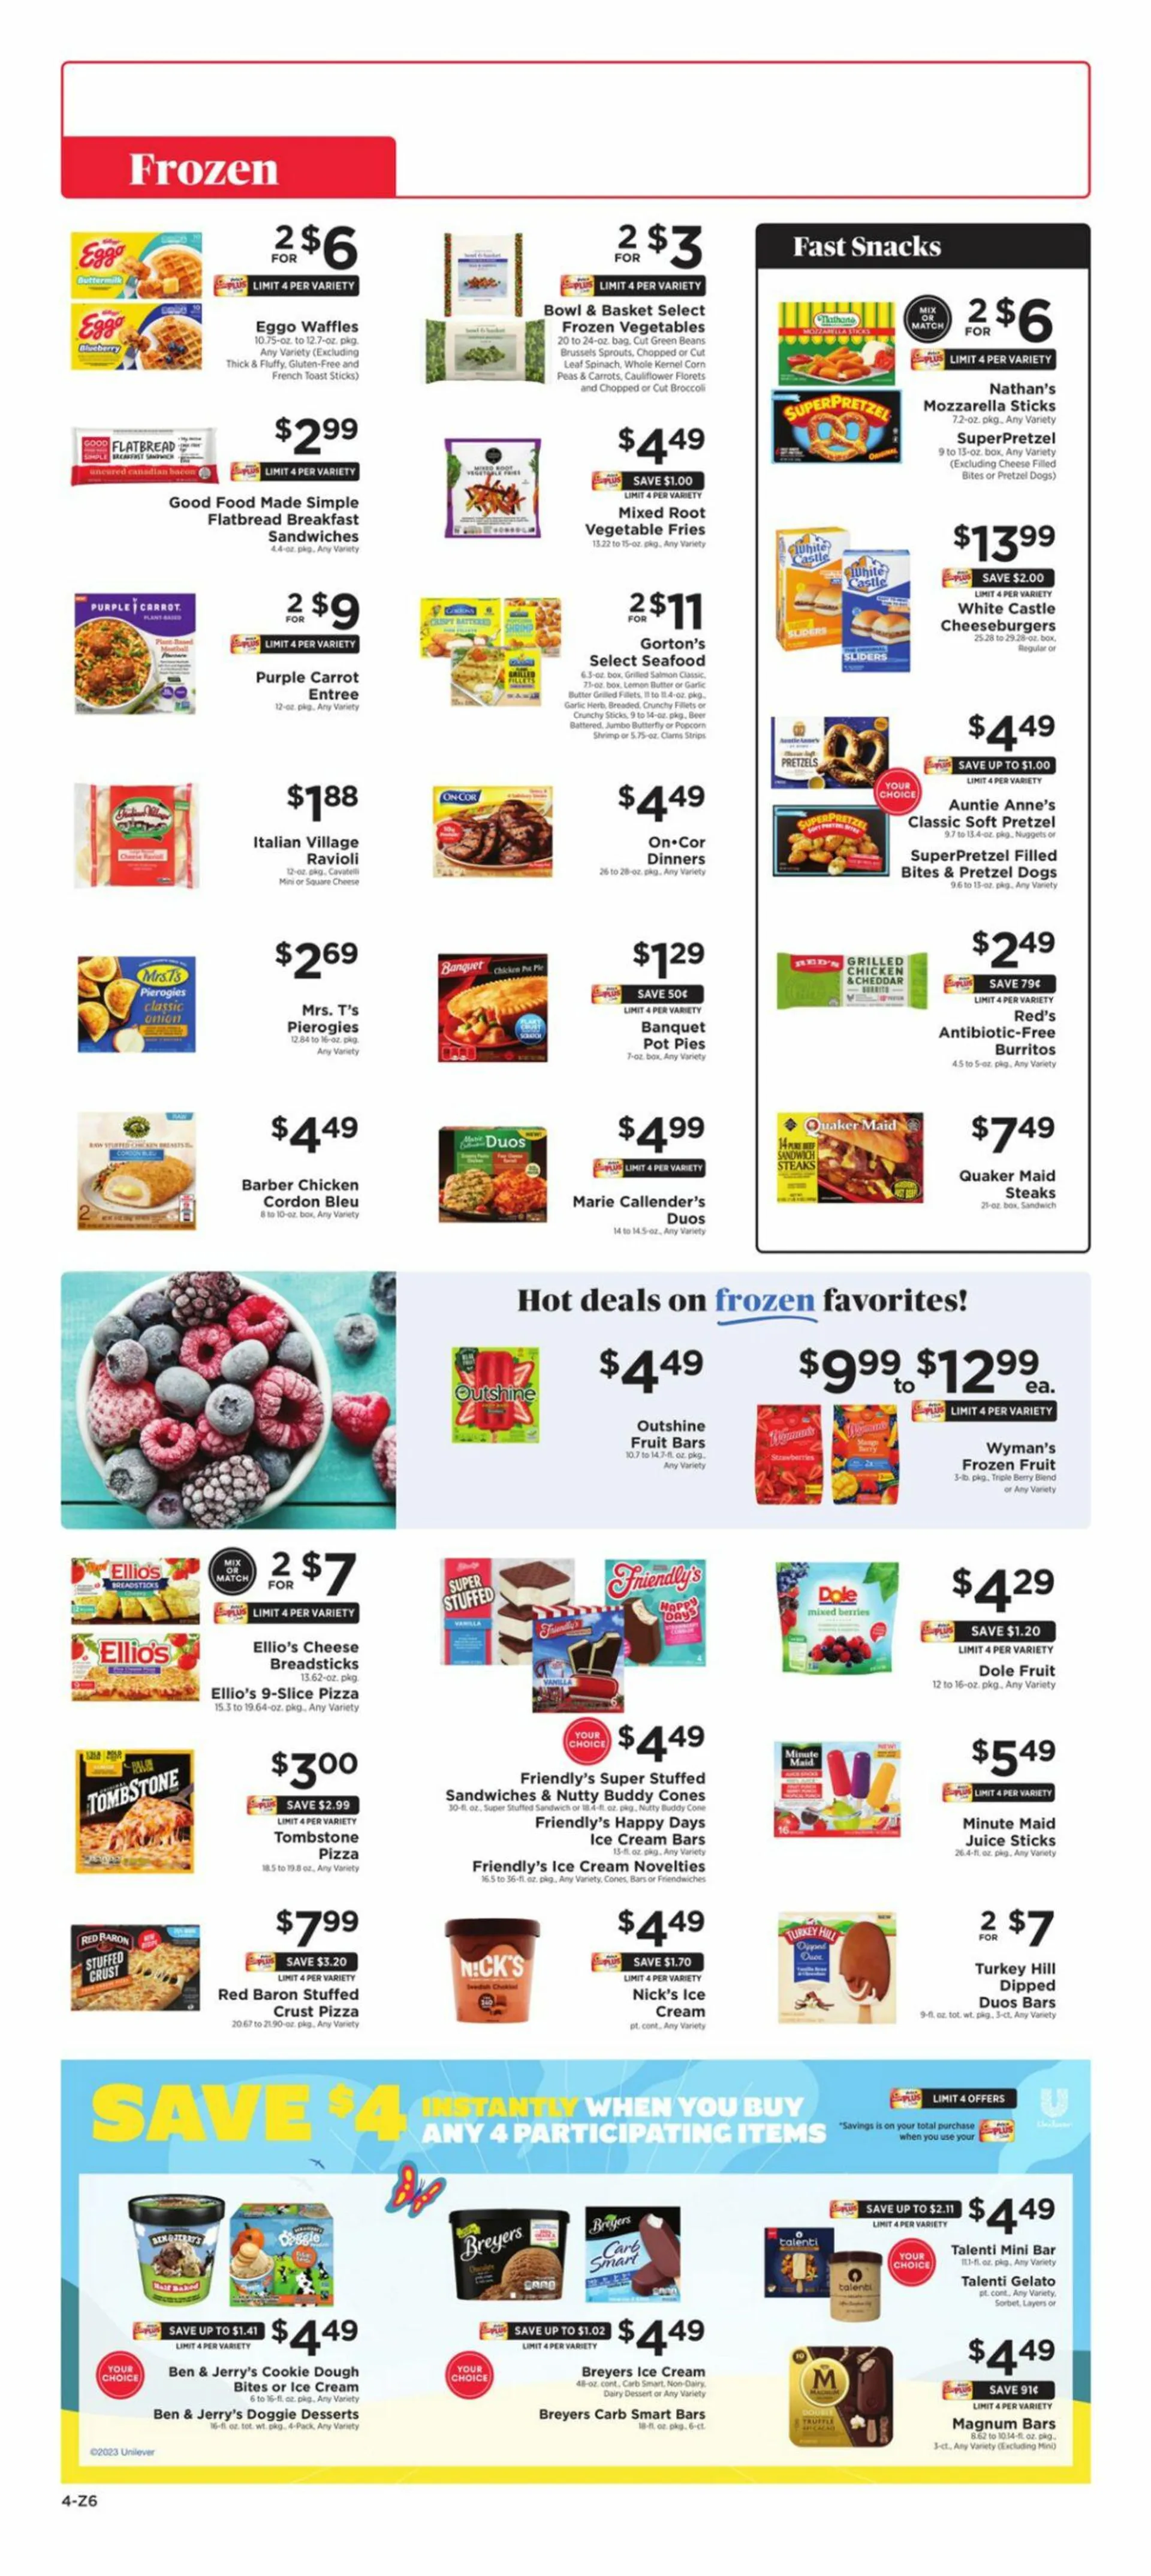 ShopRite Current weekly ad - 4